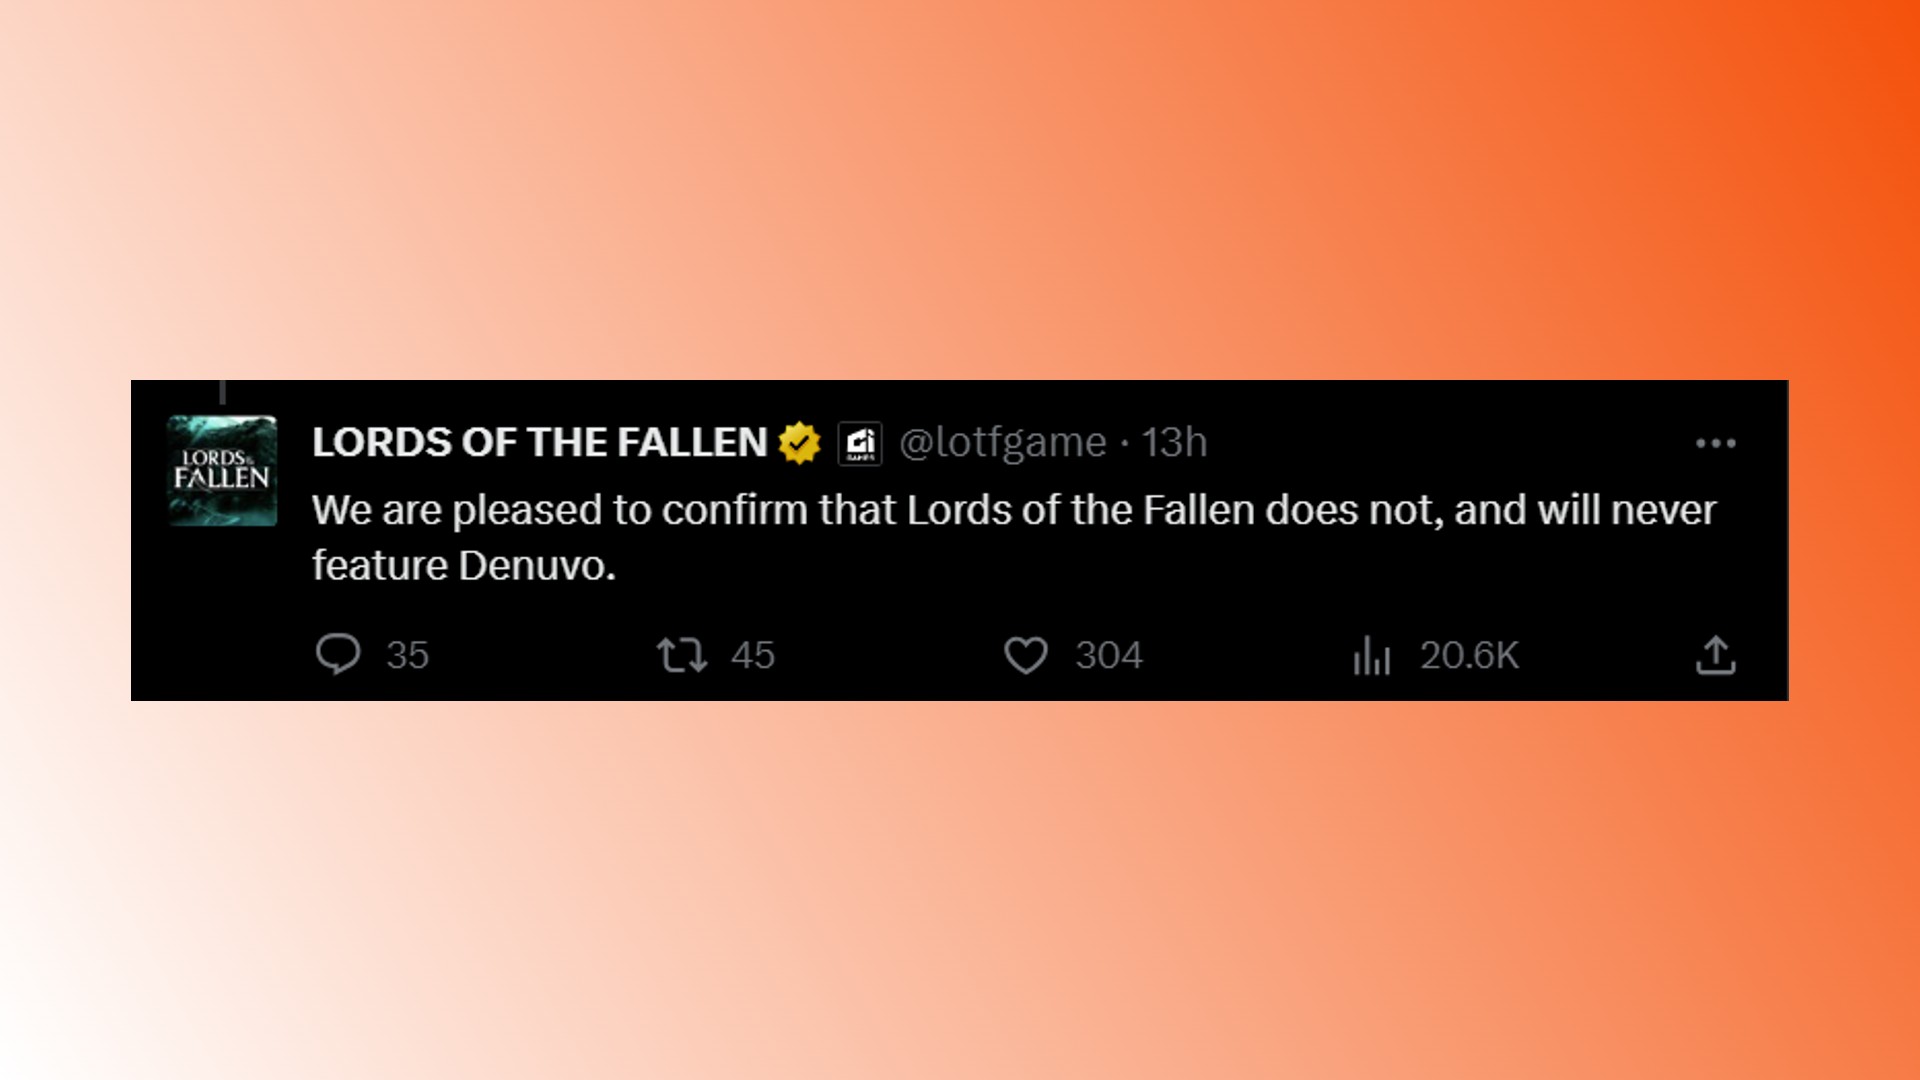 Lords of the Fallen Denuvo: A tweet from RPG game developer Hexworks regarding Denuvo in Lords of the Fallen